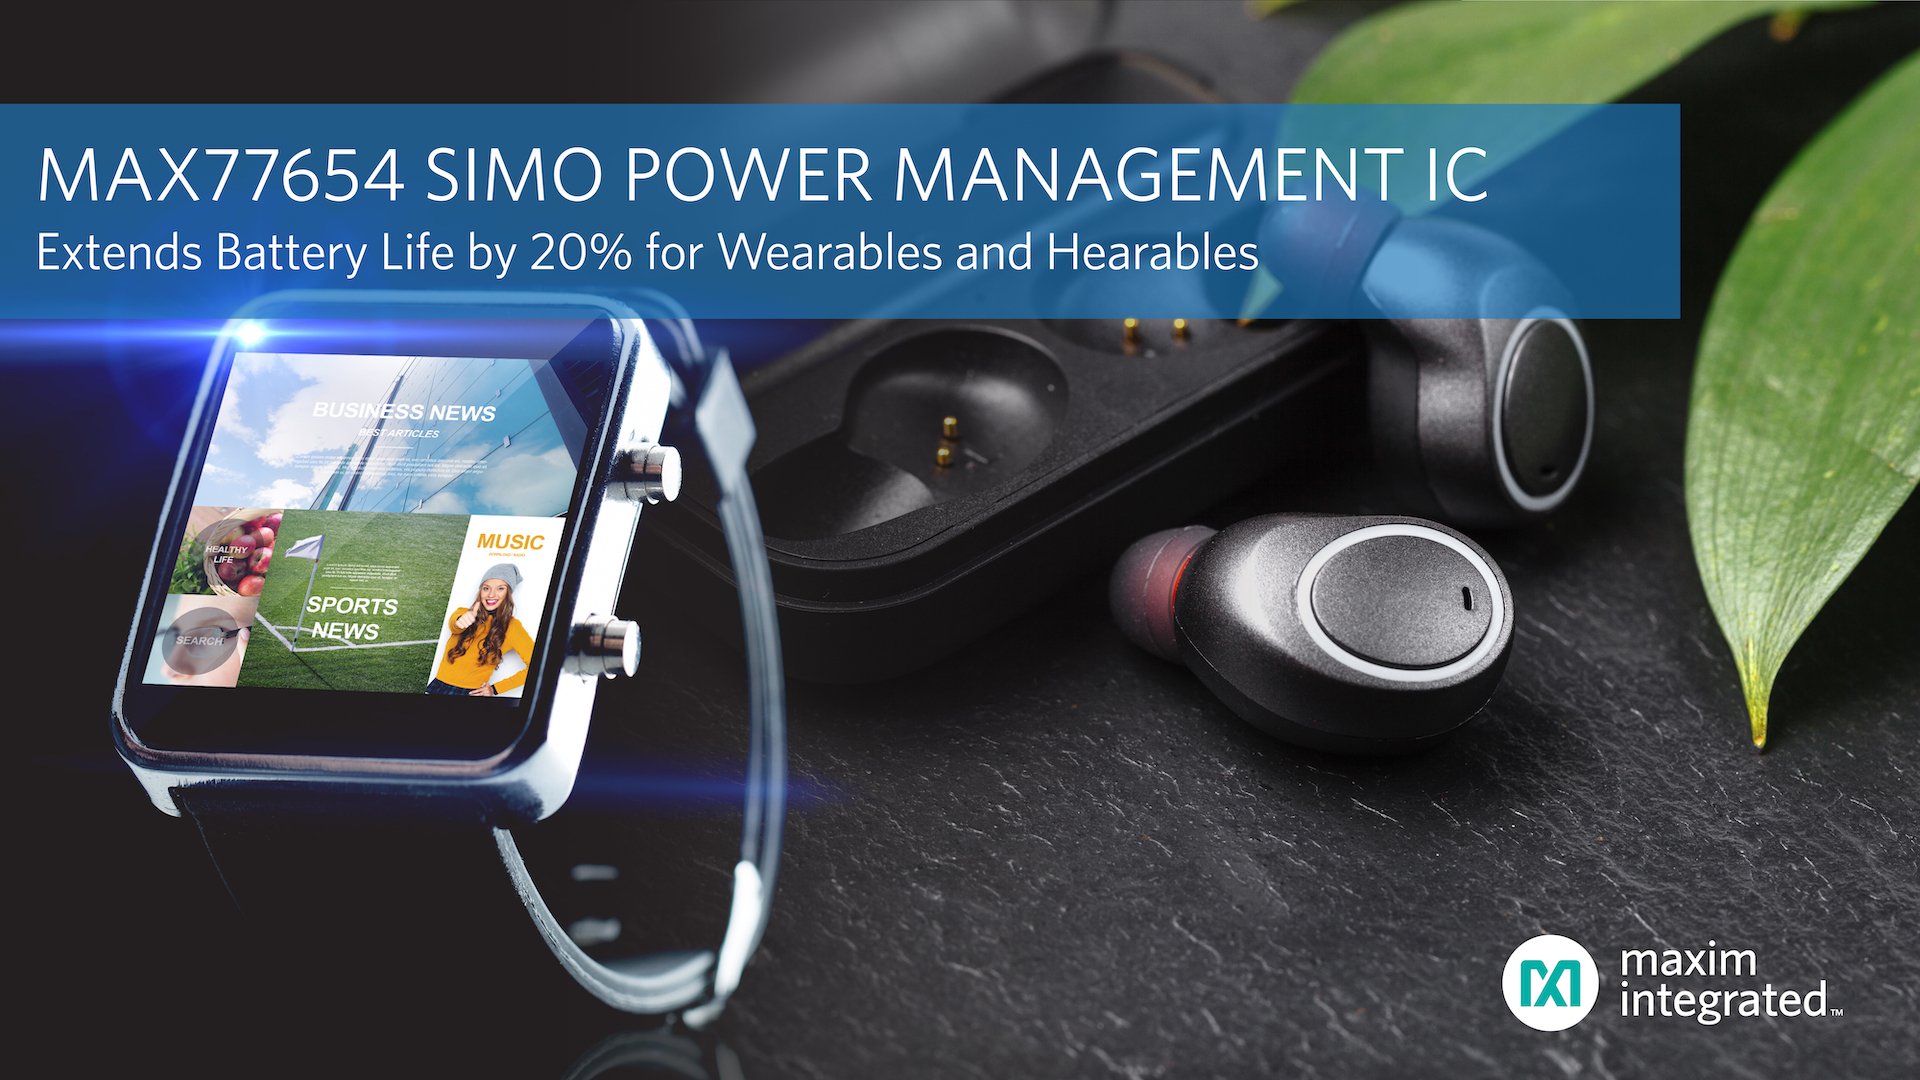 Next-Gen SIMO Power Management IC Cuts Solution Size by Half